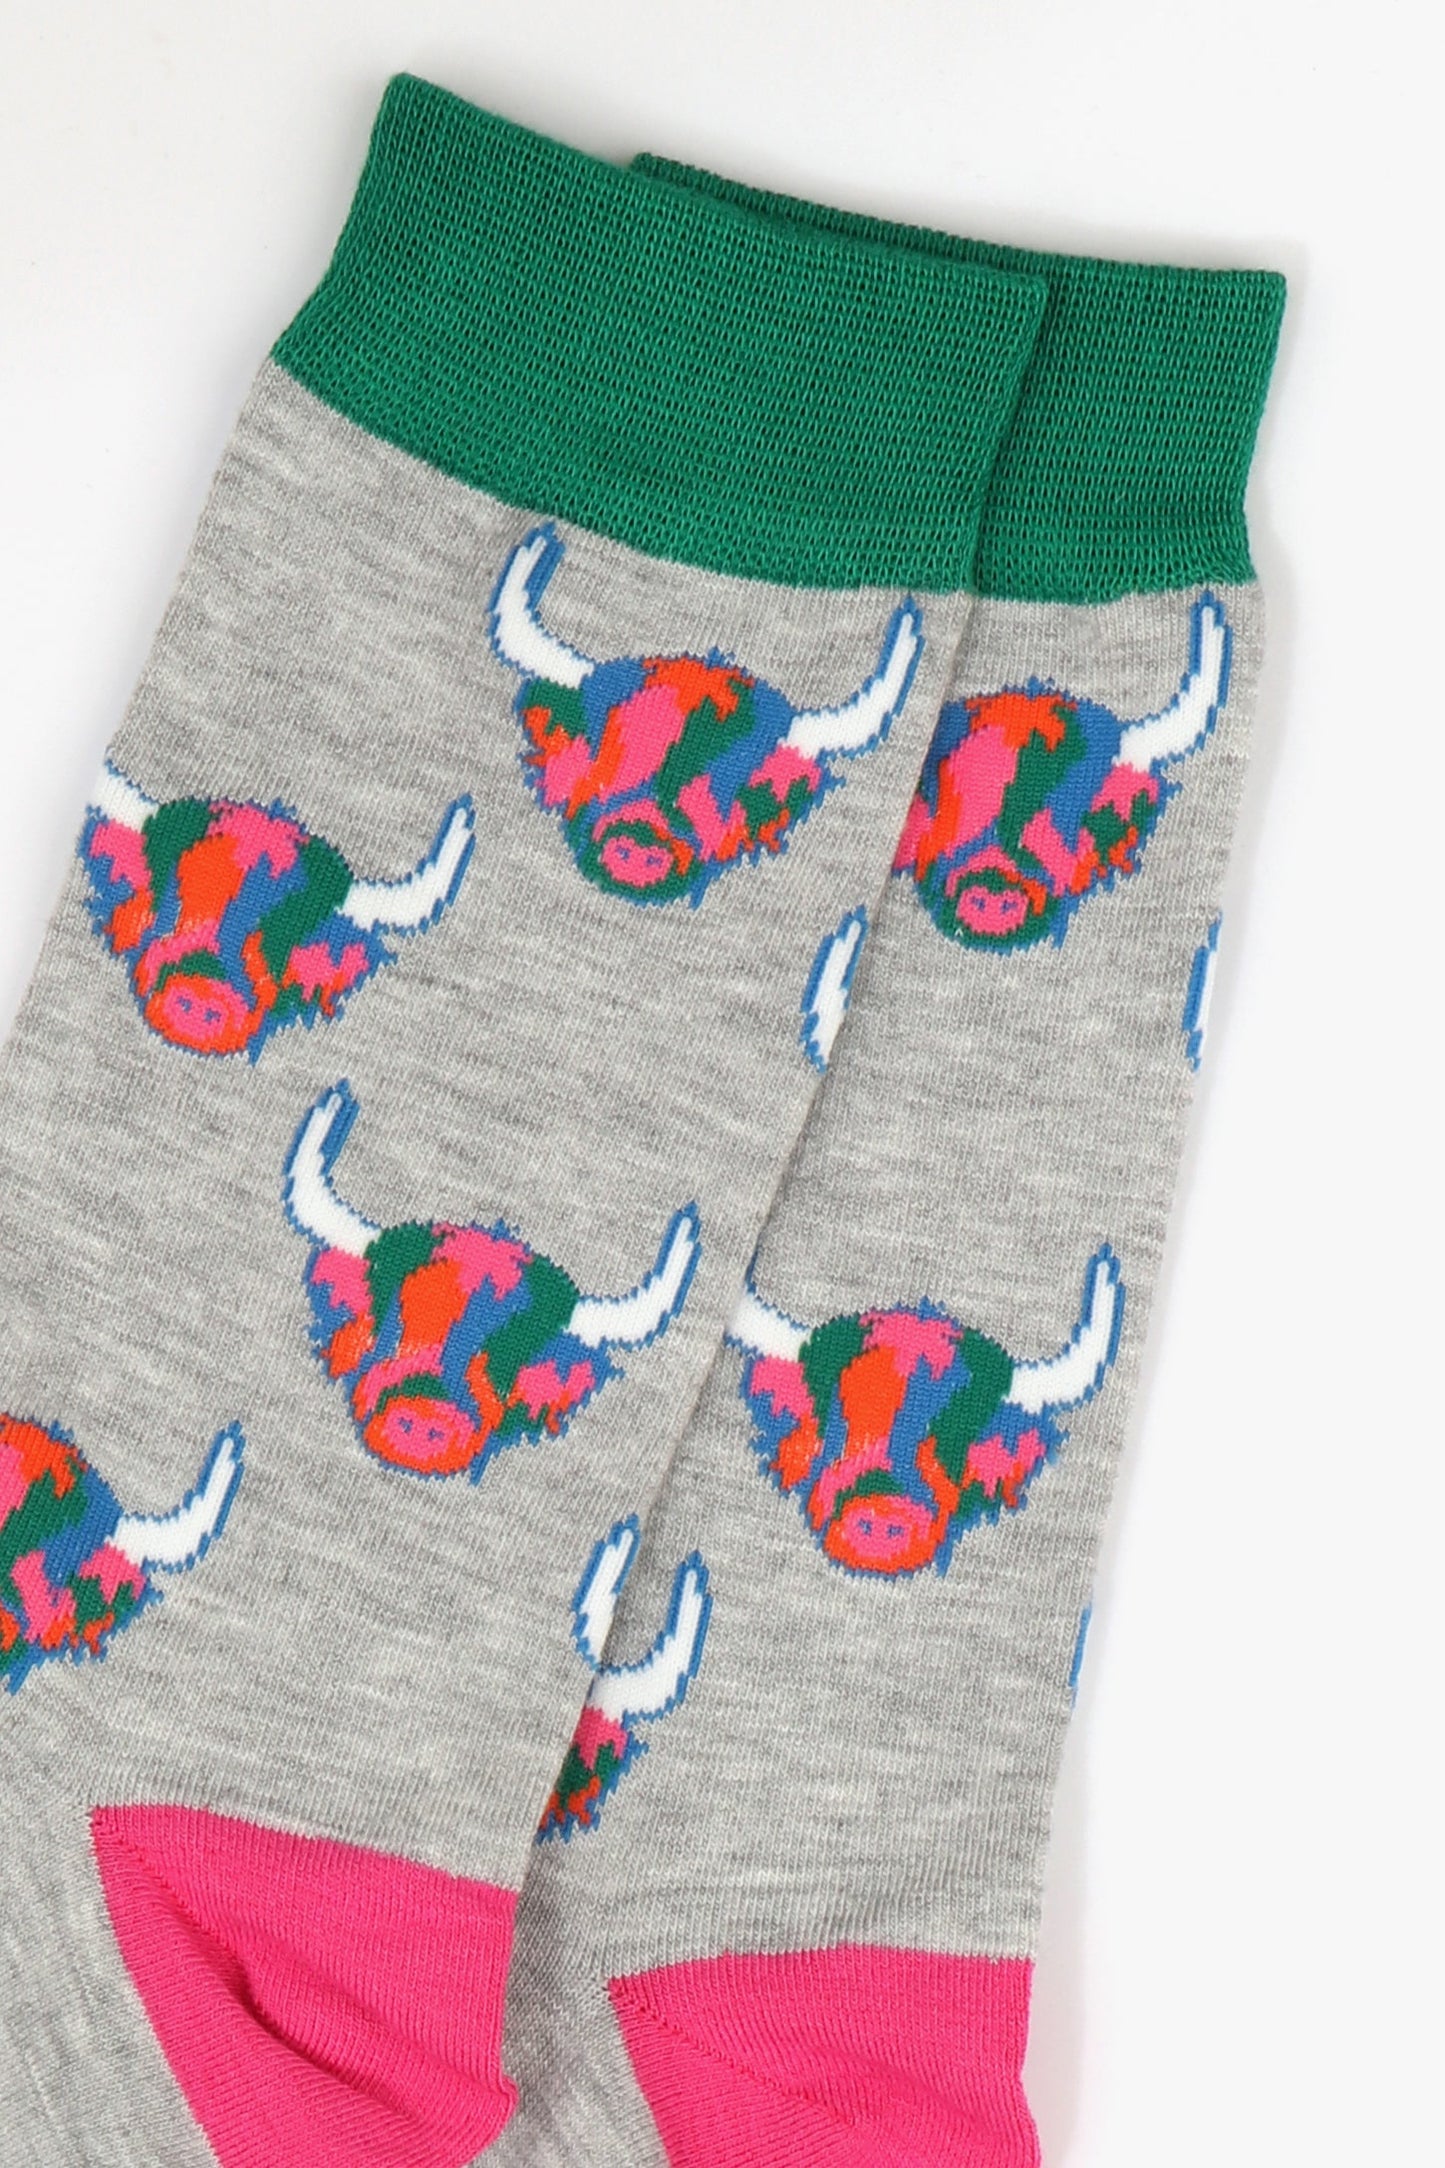 mens grey bamboo socks with green cuff and pink heel with an all over pattern of rainbow coloured highland cow faces